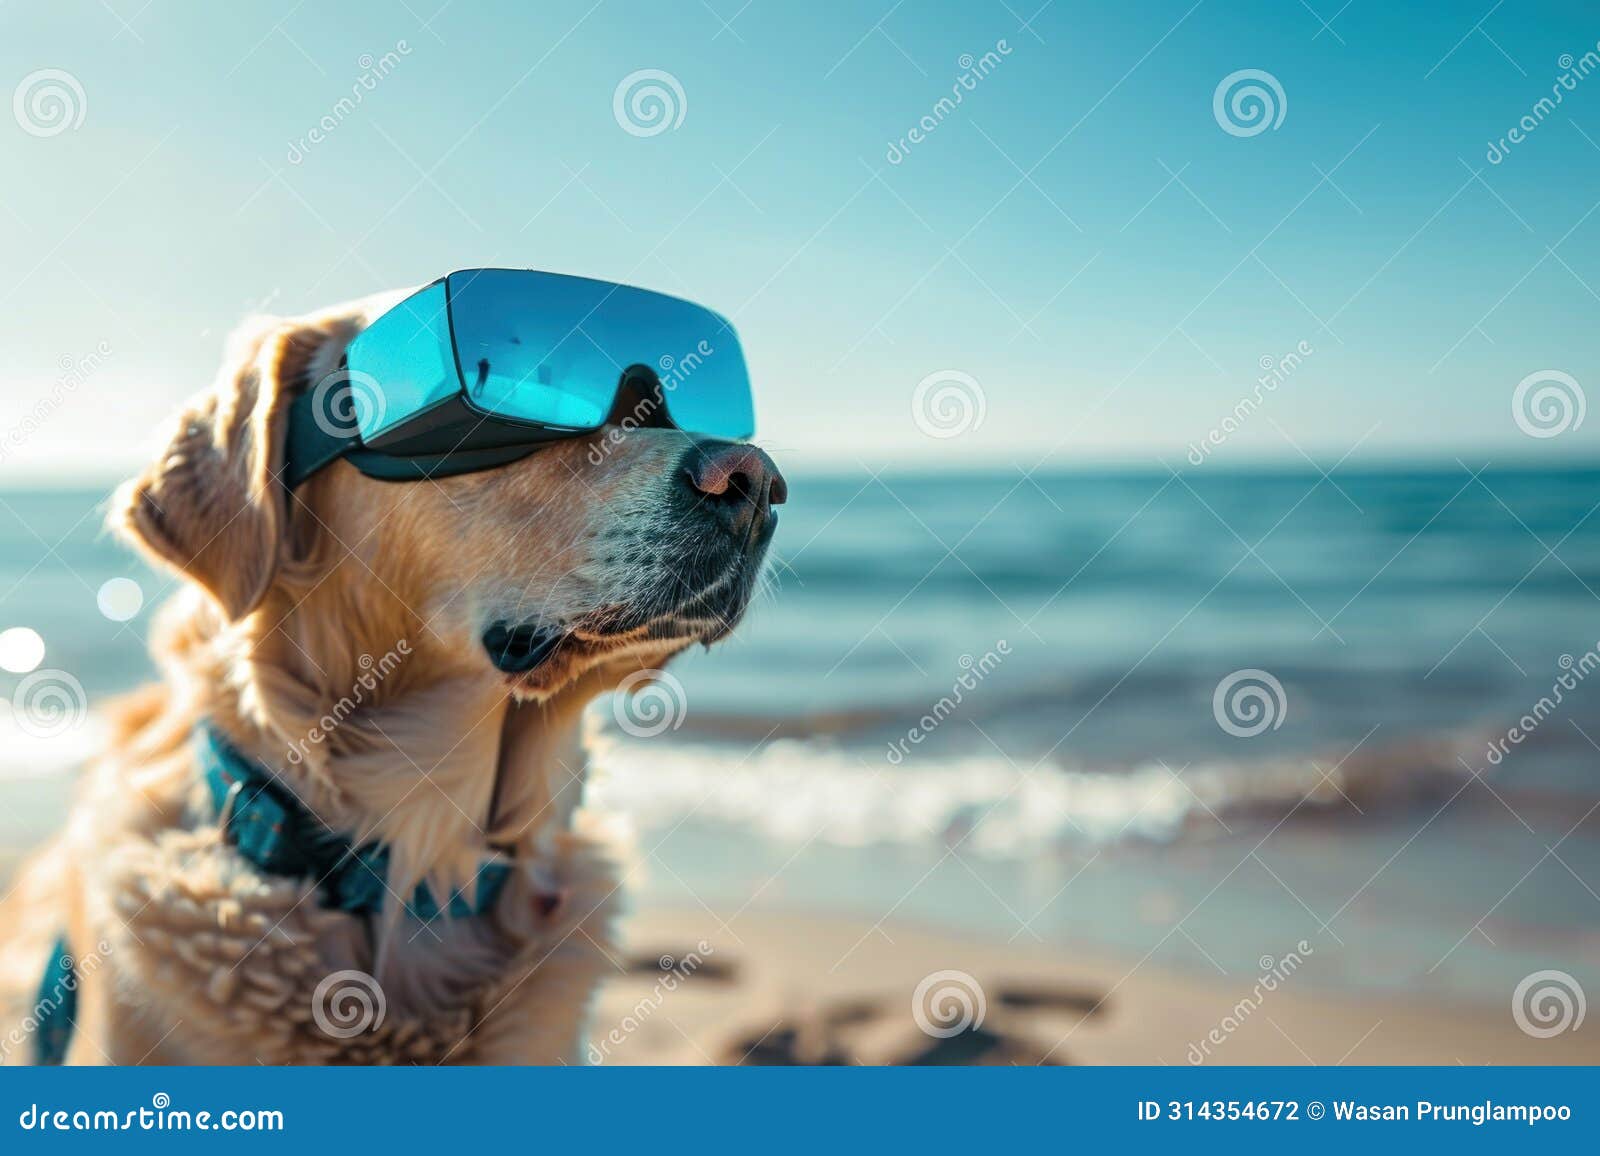 a golden retriever dog wearing blue sunglasses is sitting on the beach